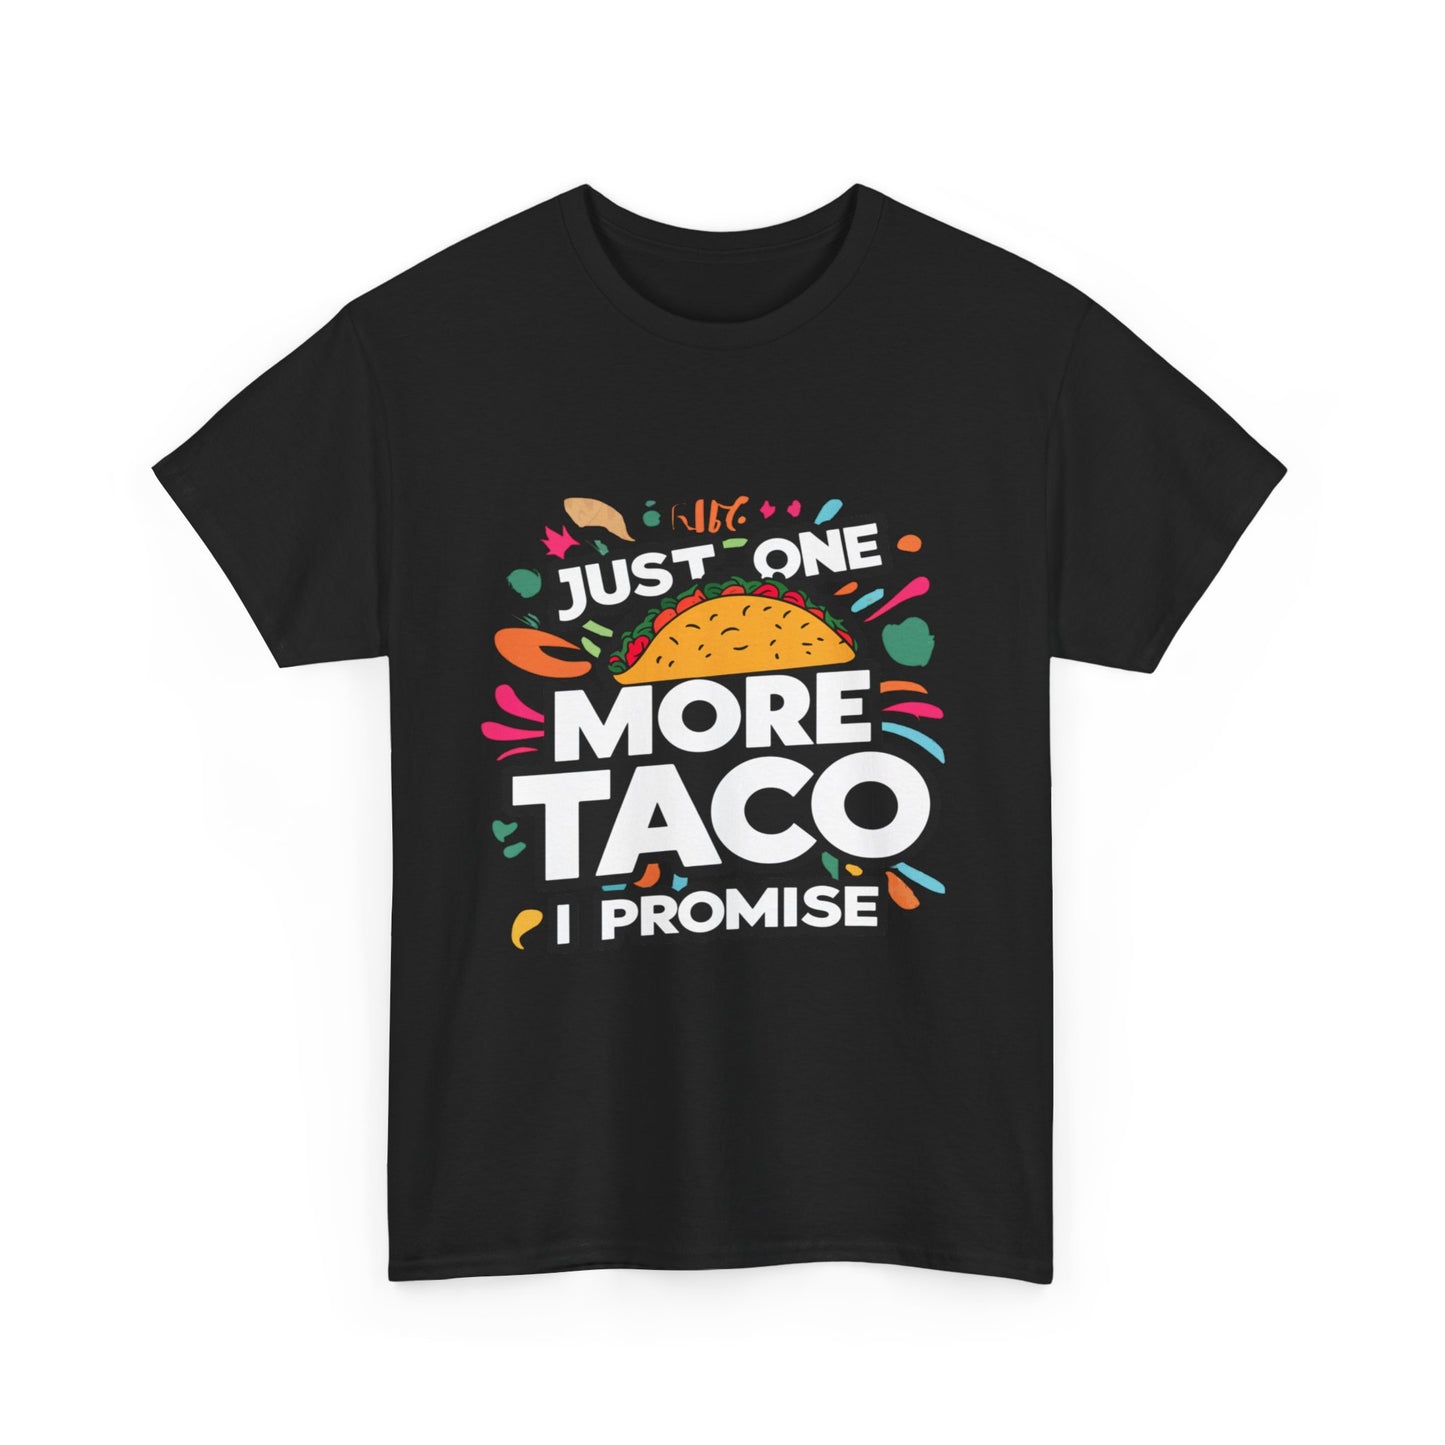 Just One More Taco I Promise Mexican Food Graphic Unisex Heavy Cotton Tee Cotton Funny Humorous Graphic Soft Premium Unisex Men Women Black T-shirt Birthday Gift-15